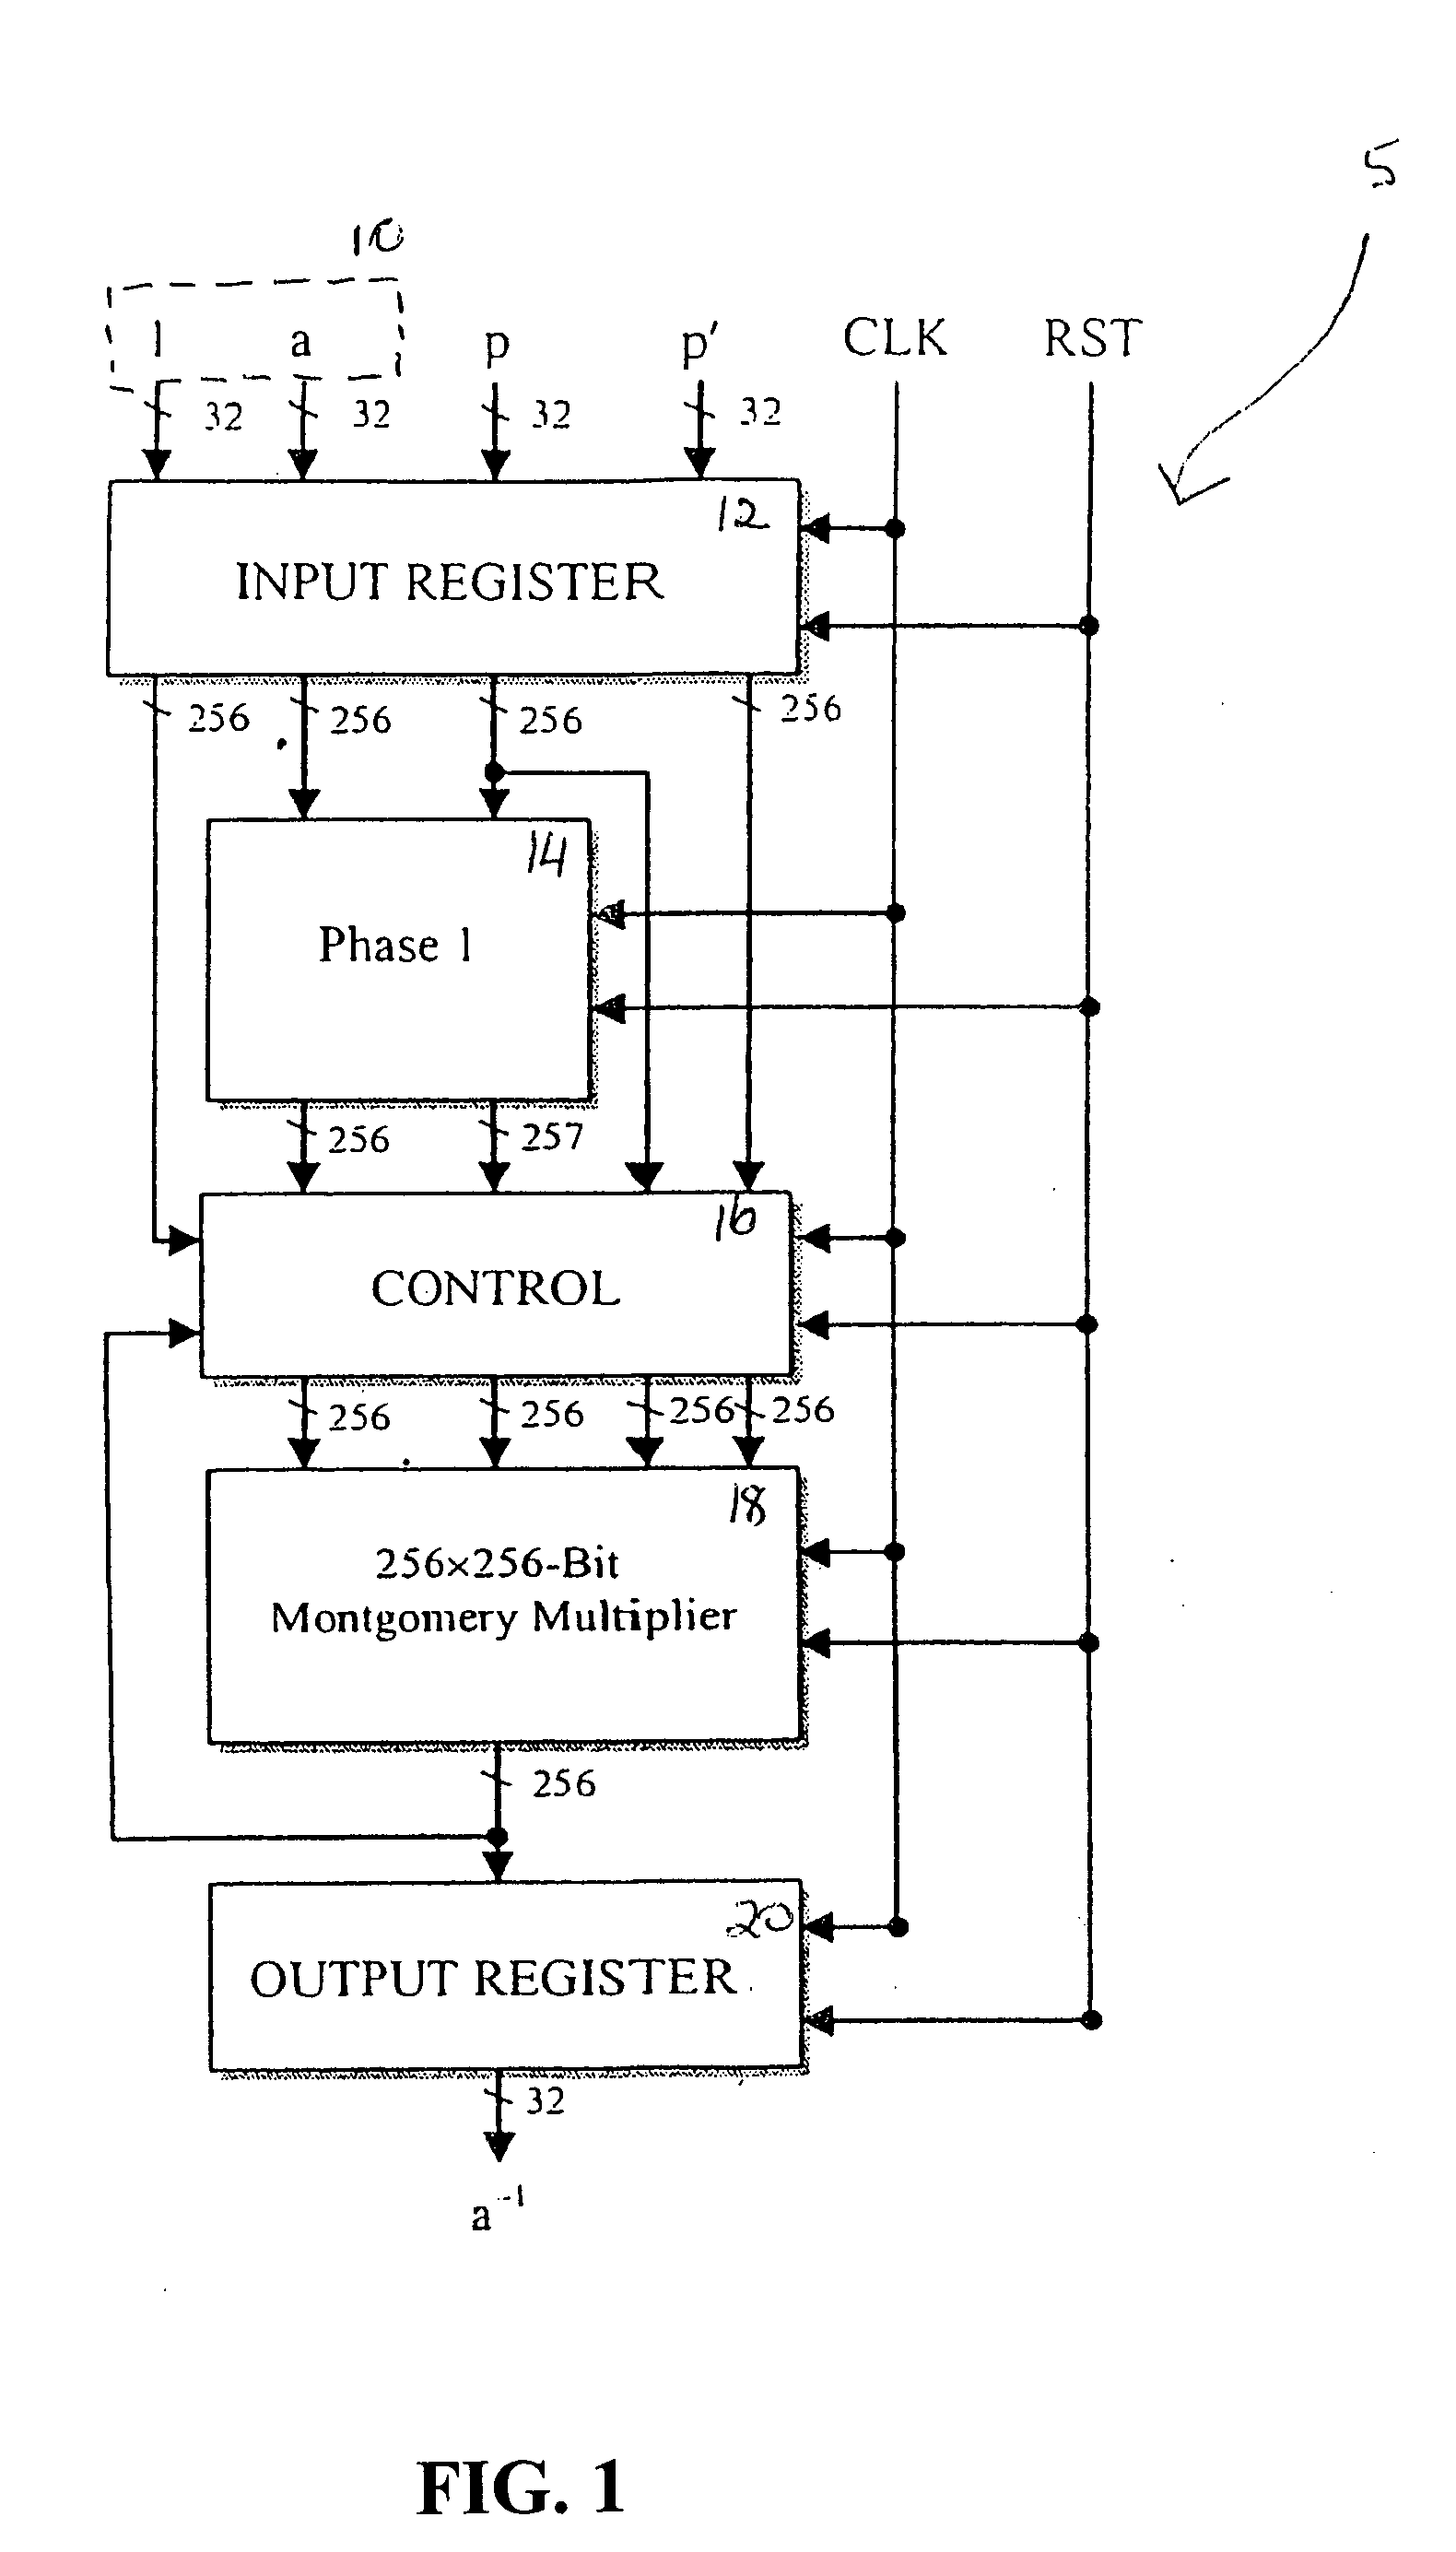 Method and apparatus for calculating a modular inverse